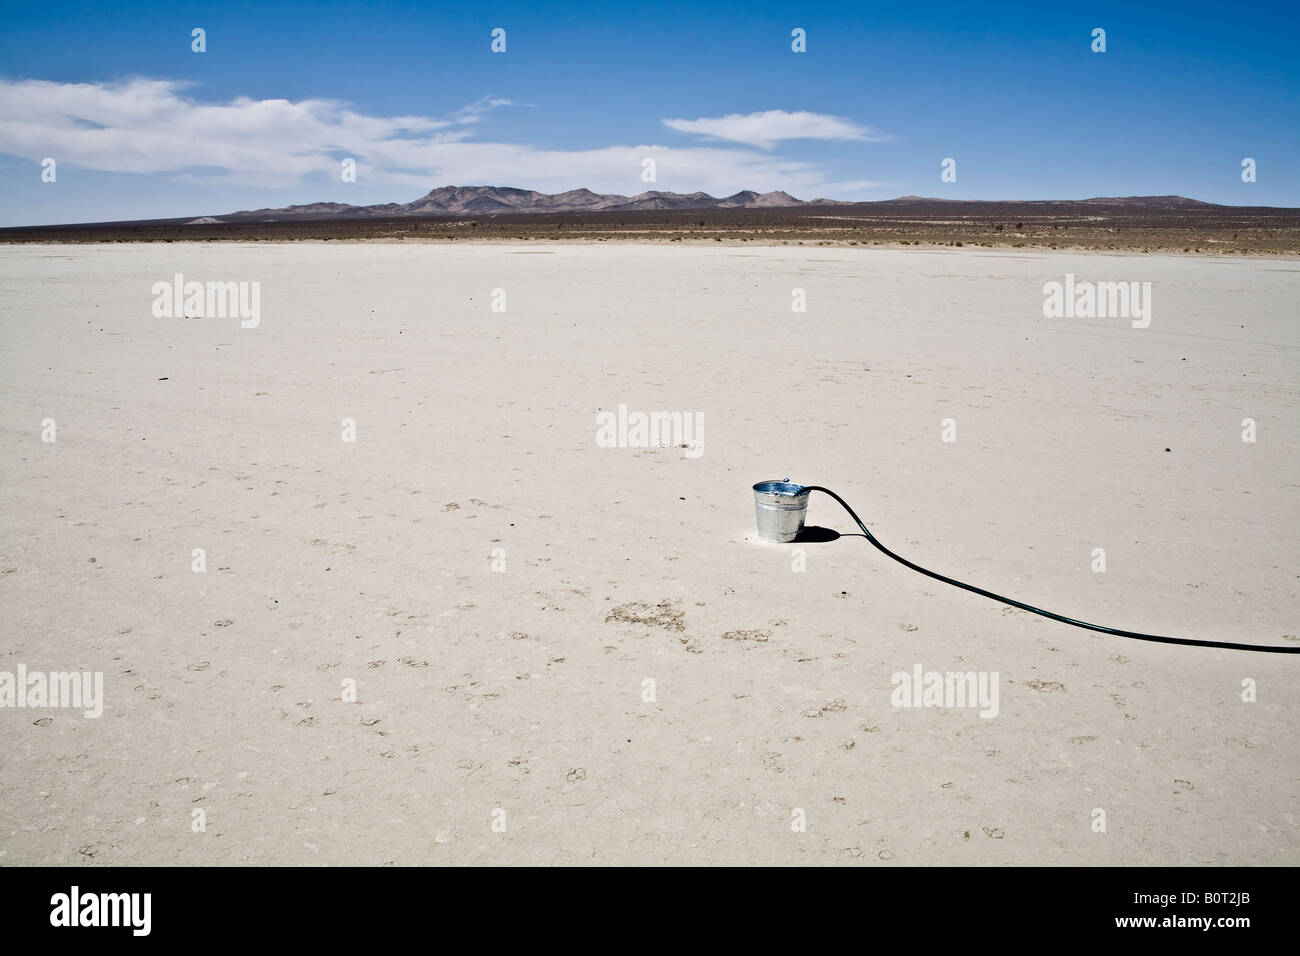 Bucket with a garden hose in the desert Stock Photo - Alamy